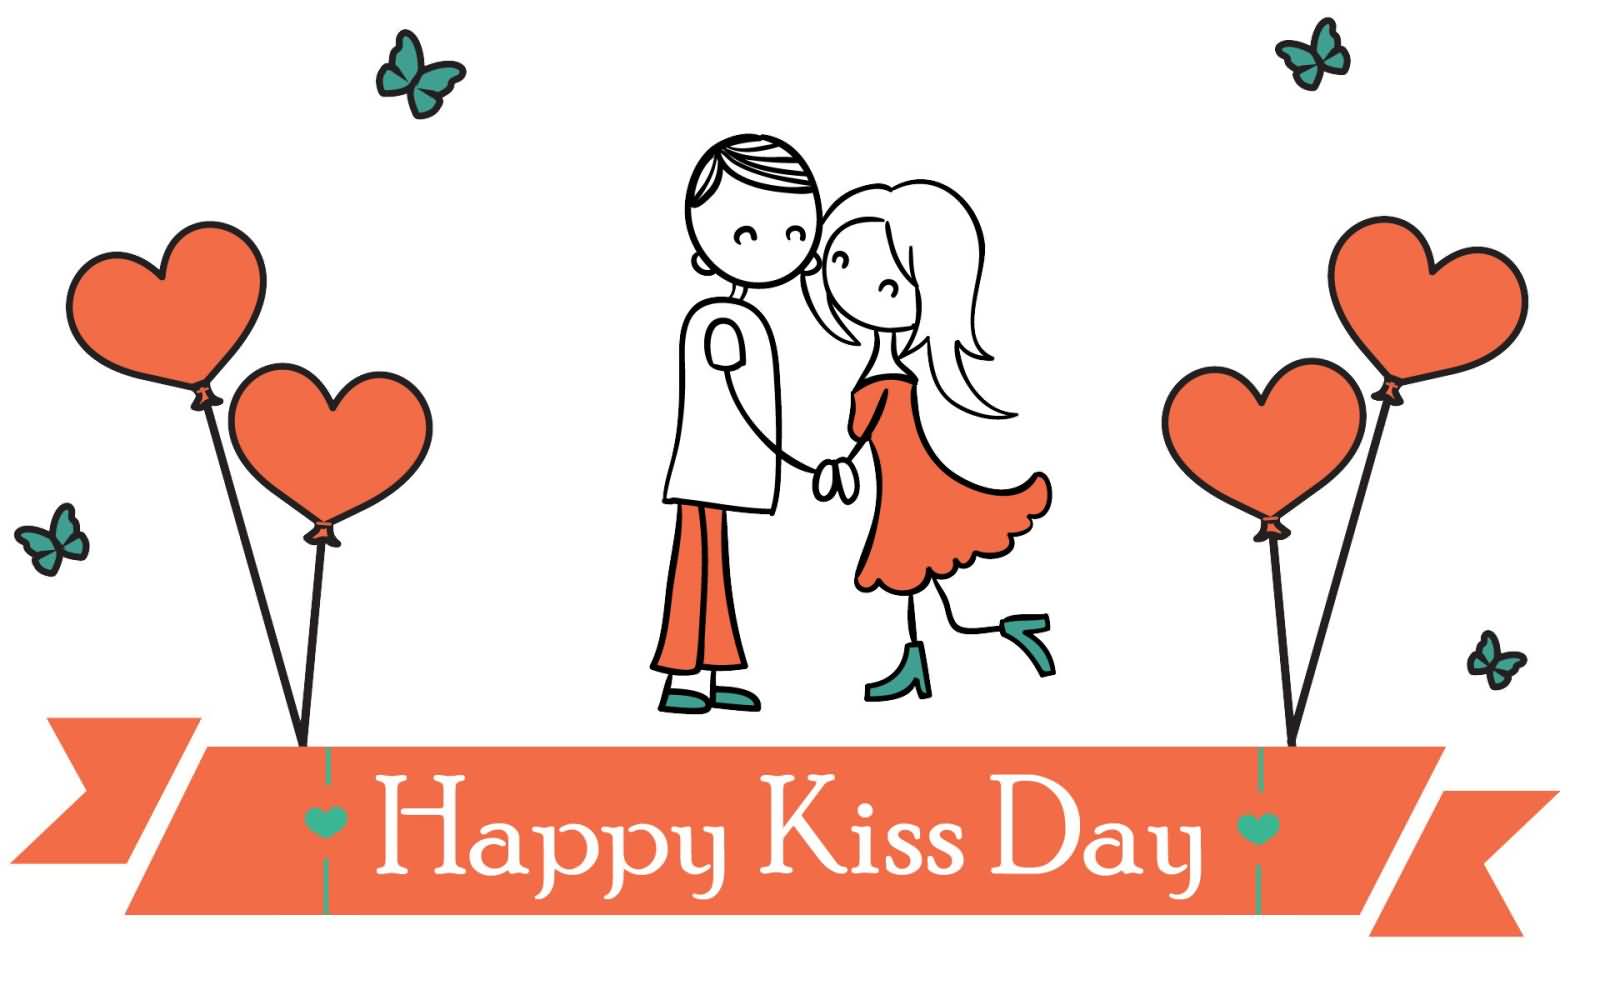 Happy Kiss Day Kissing Couple And Heart Balloons Illustration